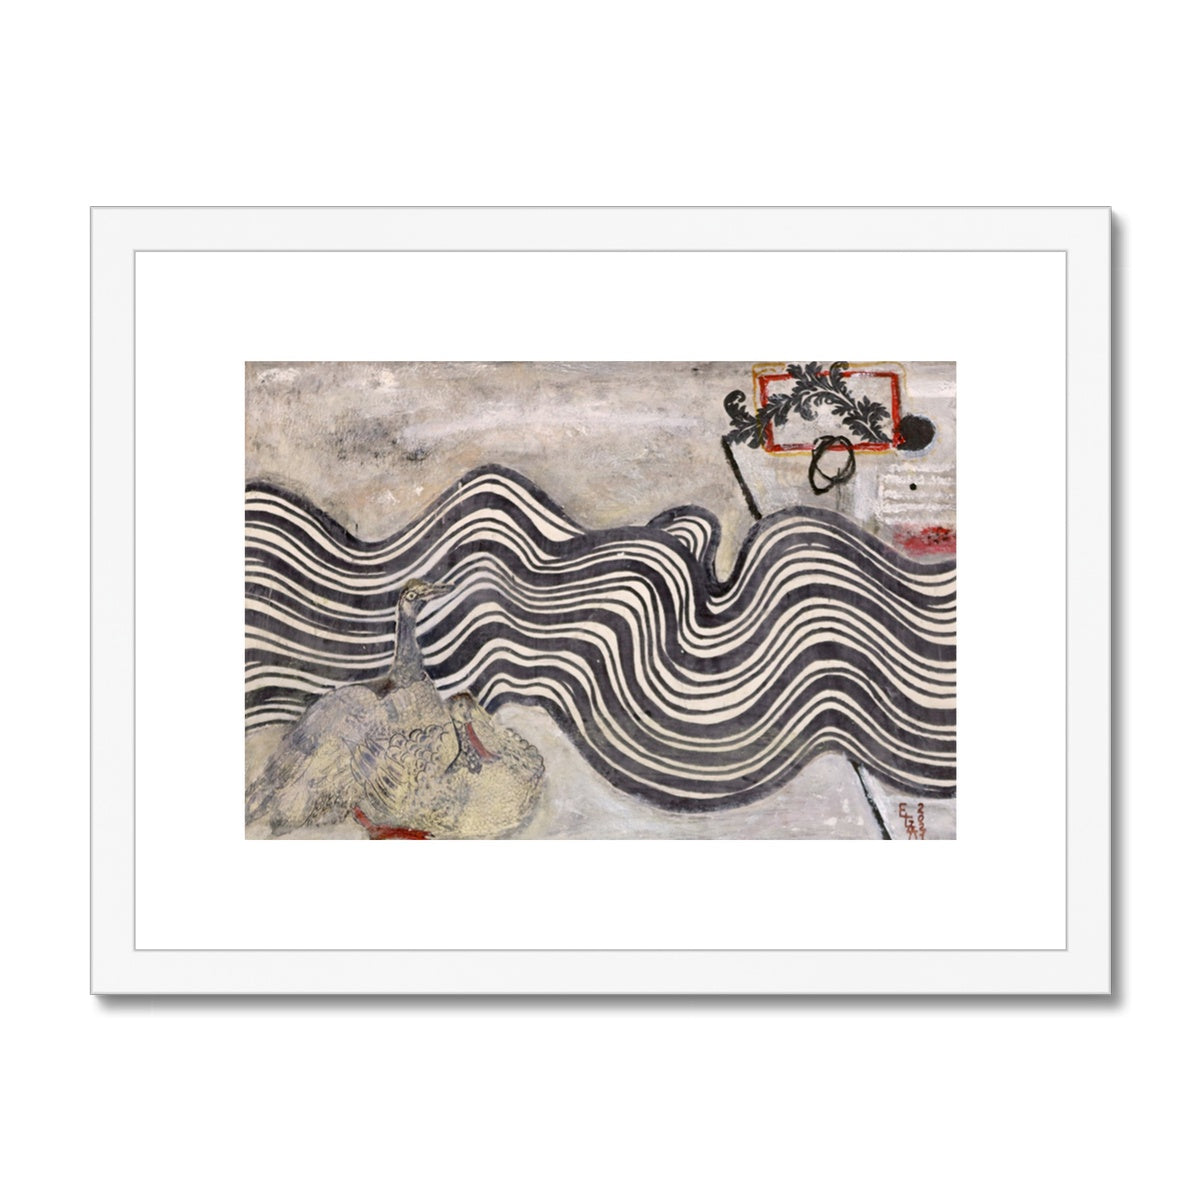 Reflective Series 2, Framed & Mounted Print